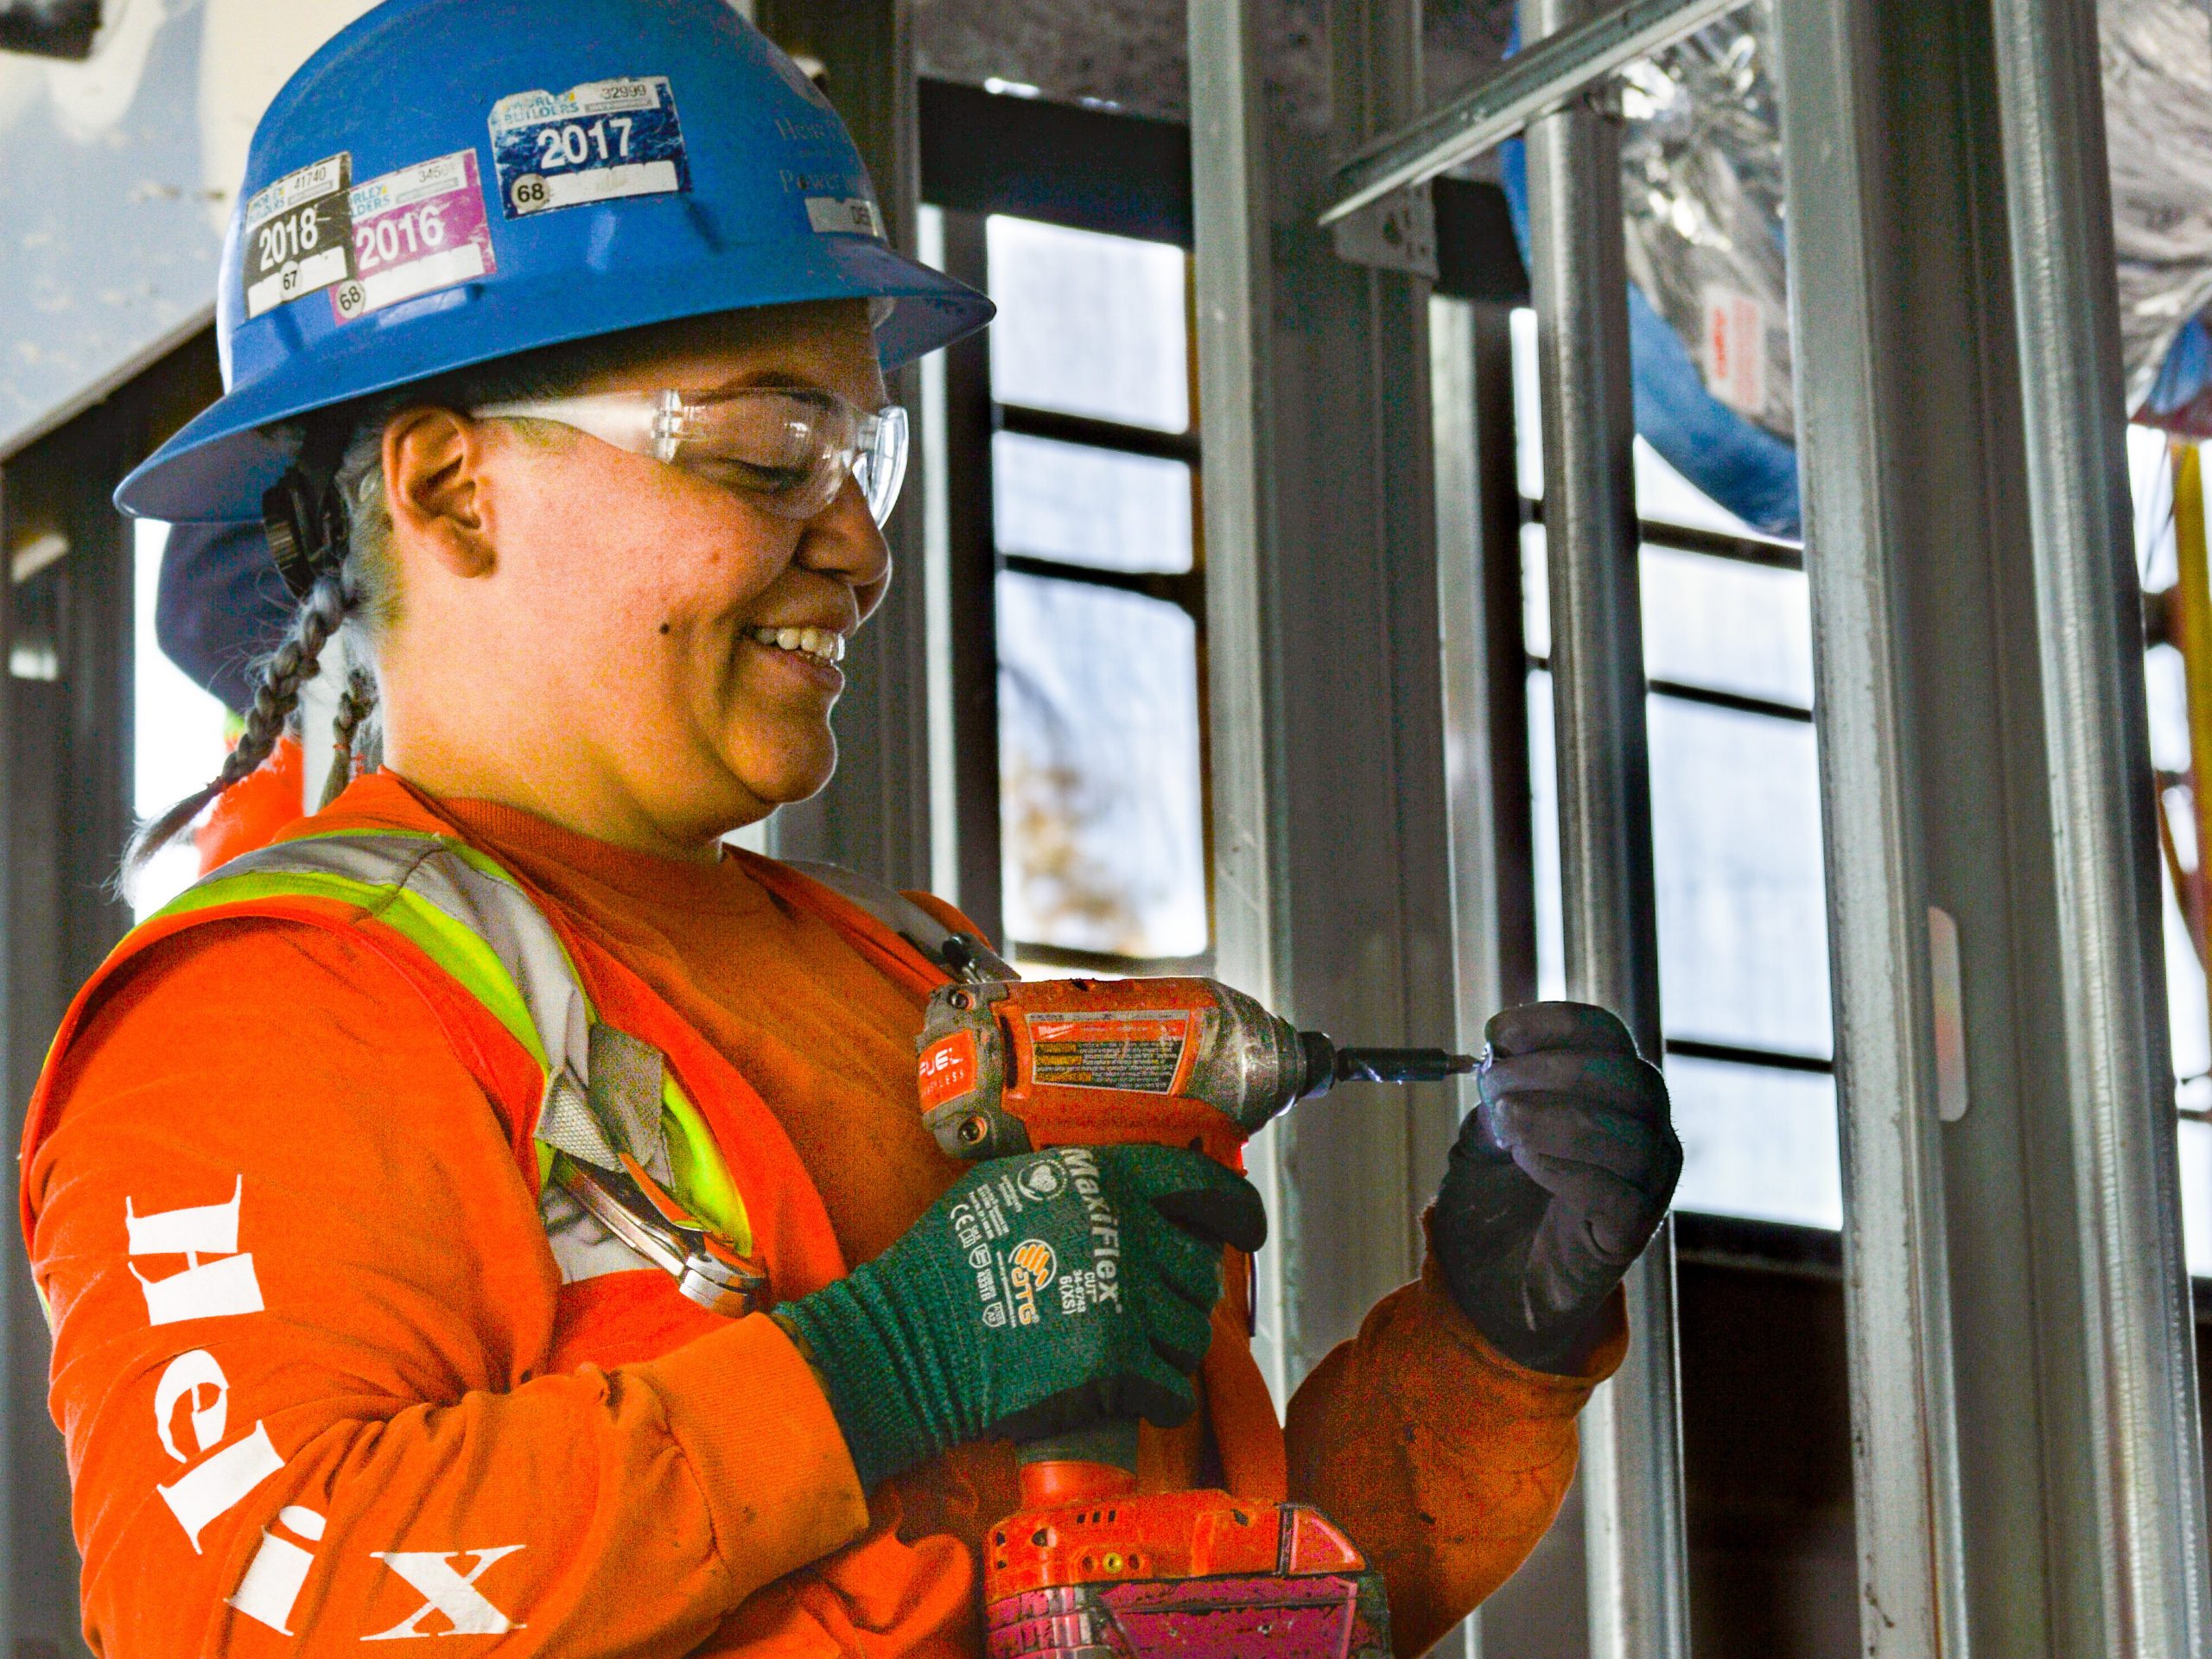 A Helix Electric employee uses a drill at a job site